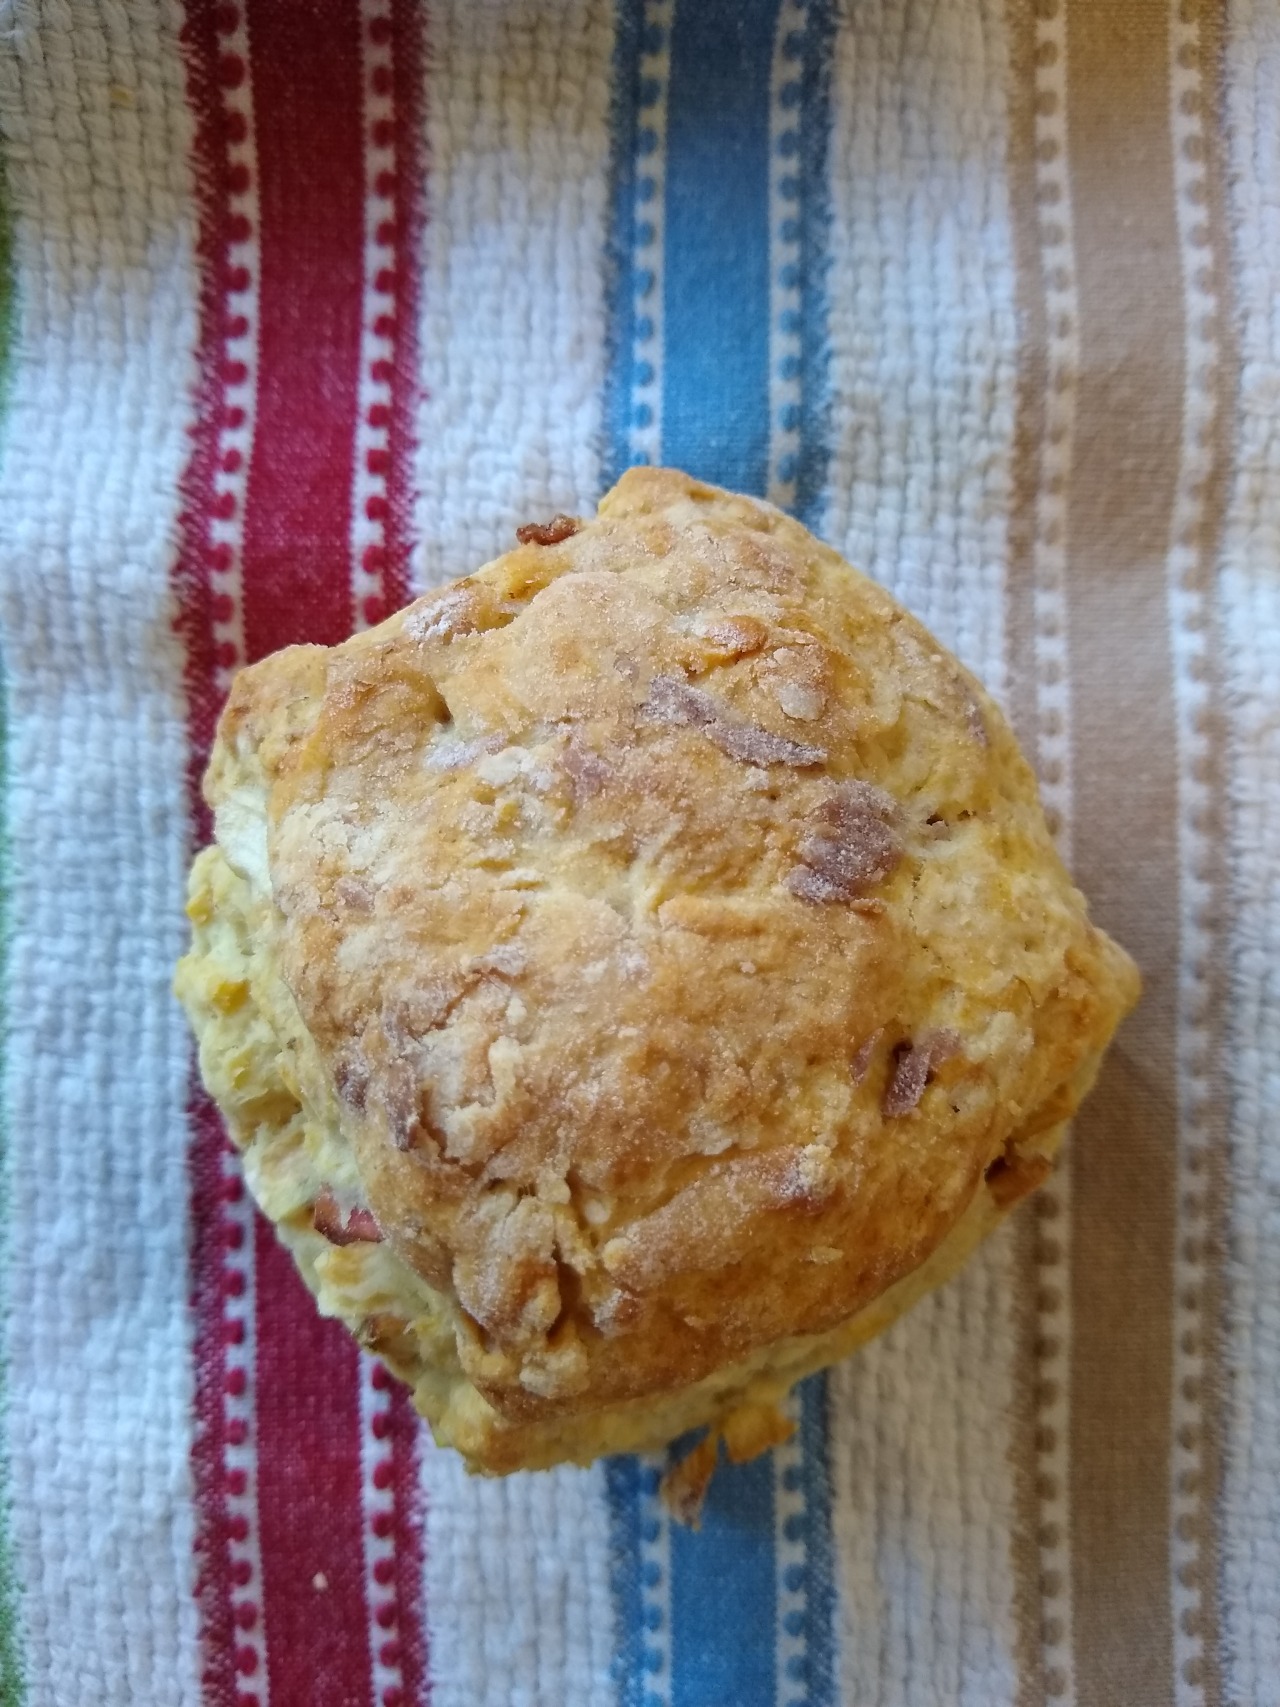 An overhead shot of an apple scone on a multicolored striped dishtowel.